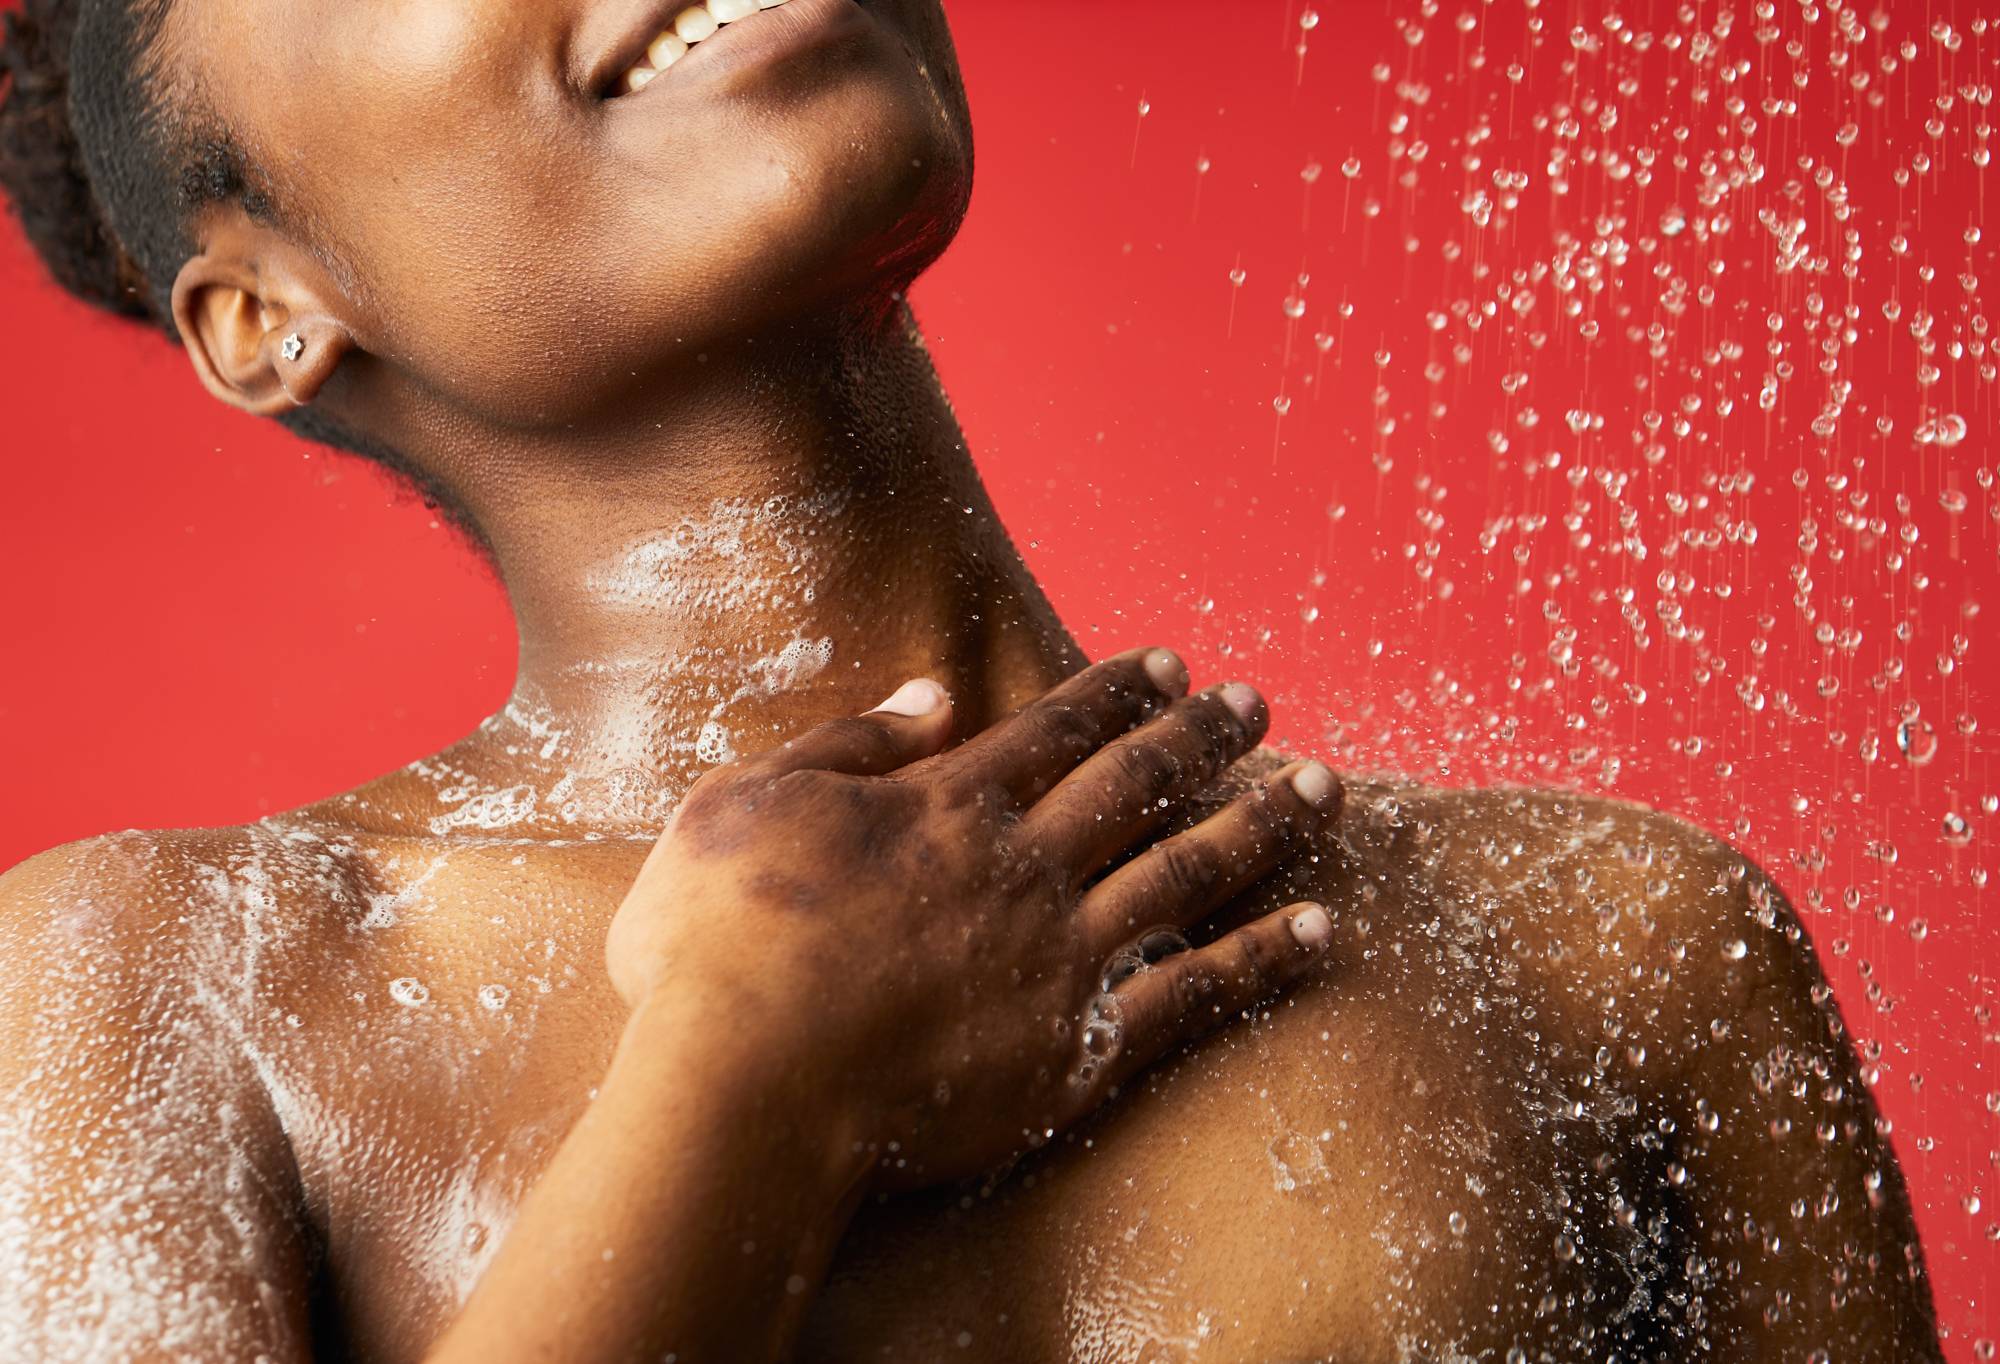 The shower gel is lathered up over a model's right shoulder with their hand, in front of a light red background.